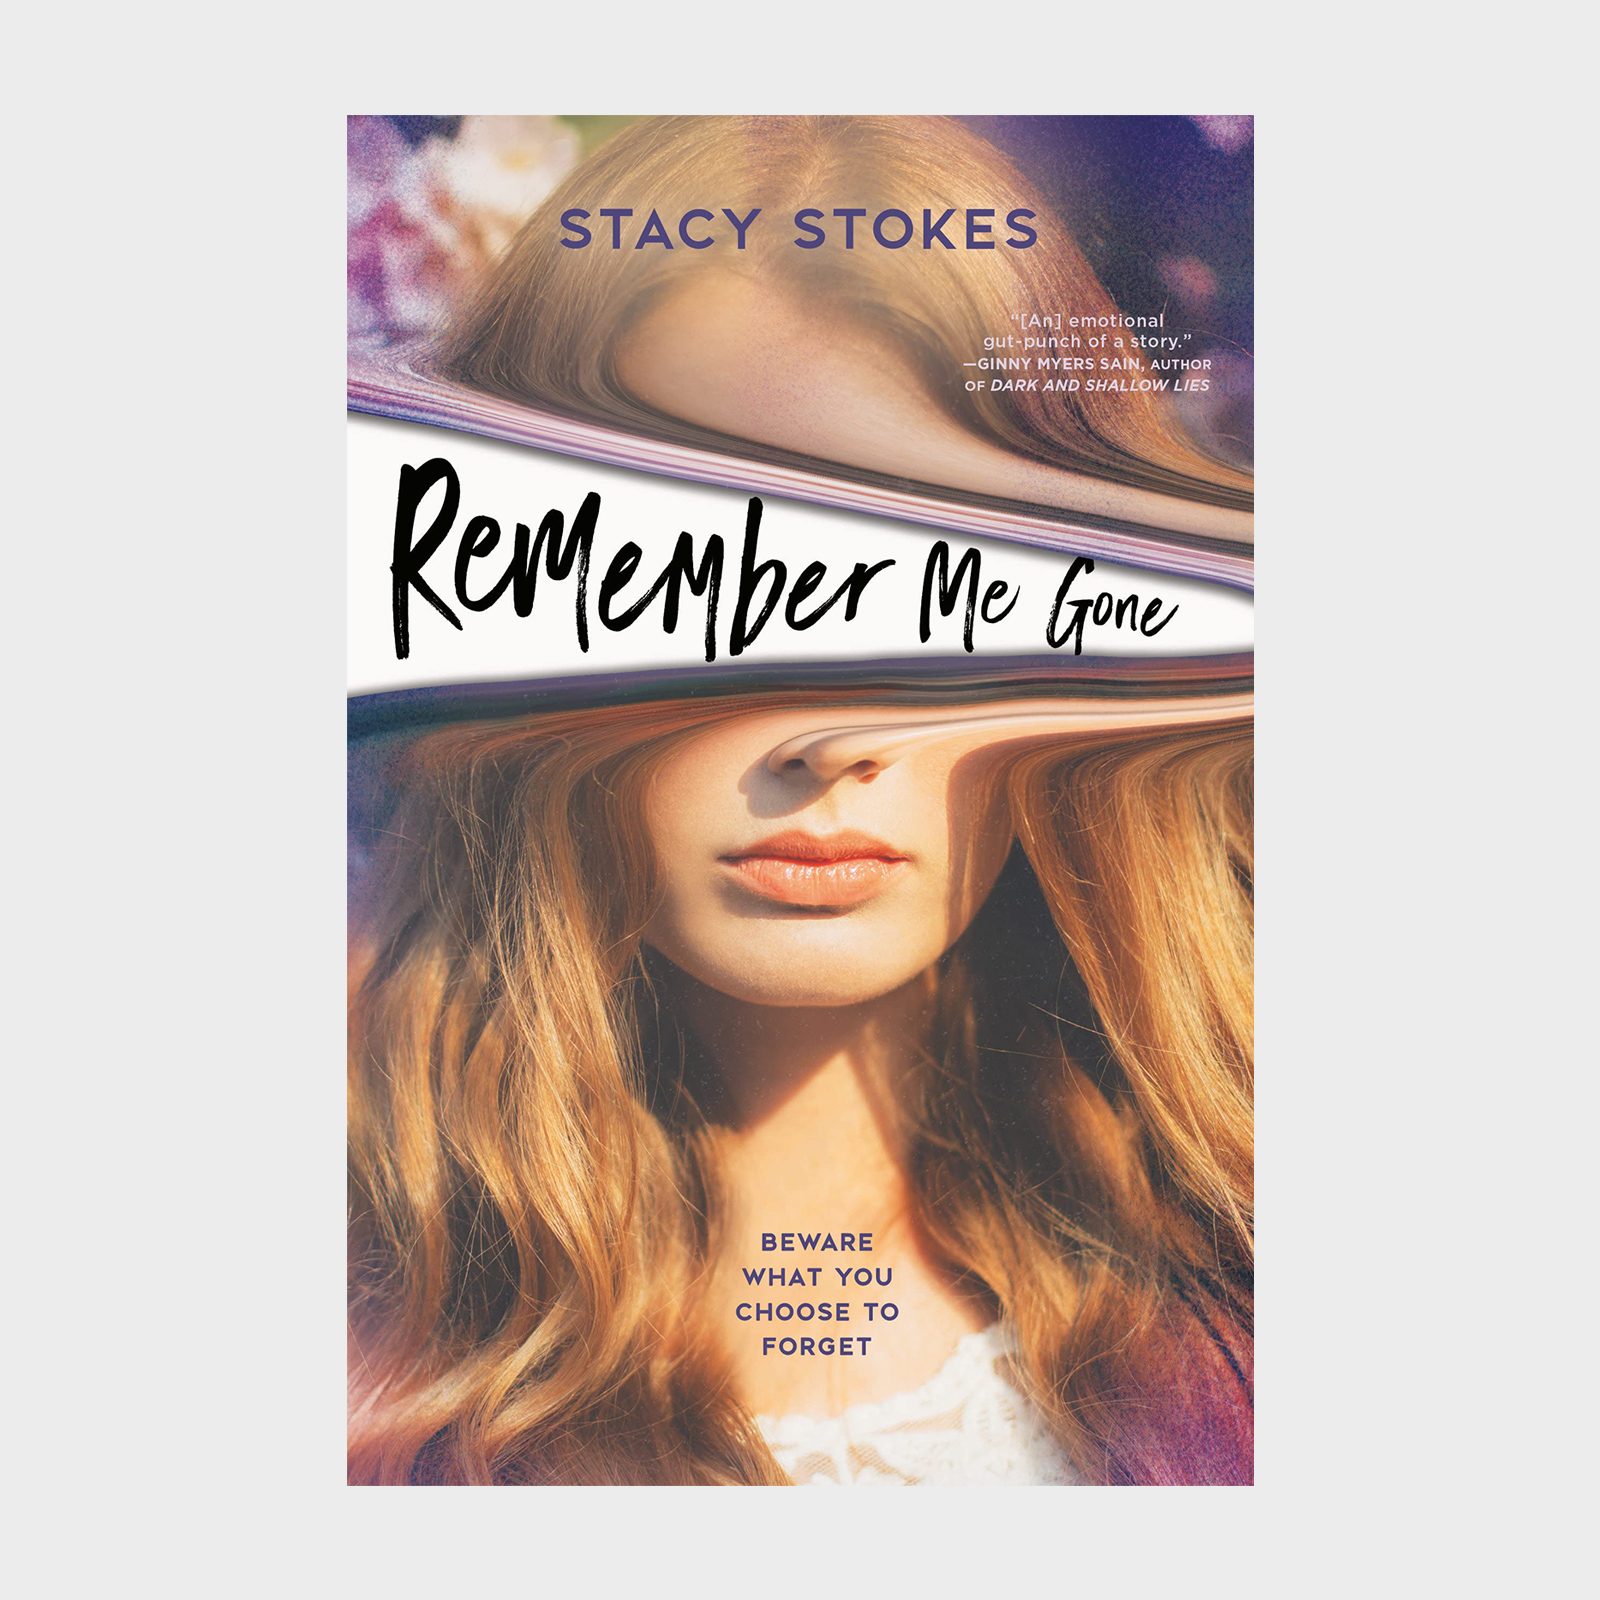 <p><strong>Release date:</strong> Mar. 22, 2022</p> <p>Imagine being able to forget your worst, most embarrassing moments. Would you? In <a href="https://www.amazon.com/Remember-Me-Gone-Stacy-Stokes/dp/0593327667" rel="noopener noreferrer"><em>Remember Me Gone</em></a>, Stacy Stokes's <a href="https://www.rd.com/list/best-books-for-teens/" rel="noopener noreferrer">young adult fiction</a> debut, Lucy's father has the power to take away memories. That's why folks swarm their little Texas town: They want help forgetting something or other. But when Lucy becomes old enough to learn his skill, she witnesses one of her dad's memories—one she wasn't meant to see. This fast-paced paranormal thriller blends science fiction, fantasy and a touch of adolescent romance. But what makes it stand apart are the deep, thought-provoking questions woven into the story. What would you choose to forget? And what secrets are worth remembering?</p> <p class="listicle-page__cta-button-shop"><a class="shop-btn" href="https://www.amazon.com/Remember-Me-Gone-Stacy-Stokes/dp/0593327667">Shop Now</a></p>